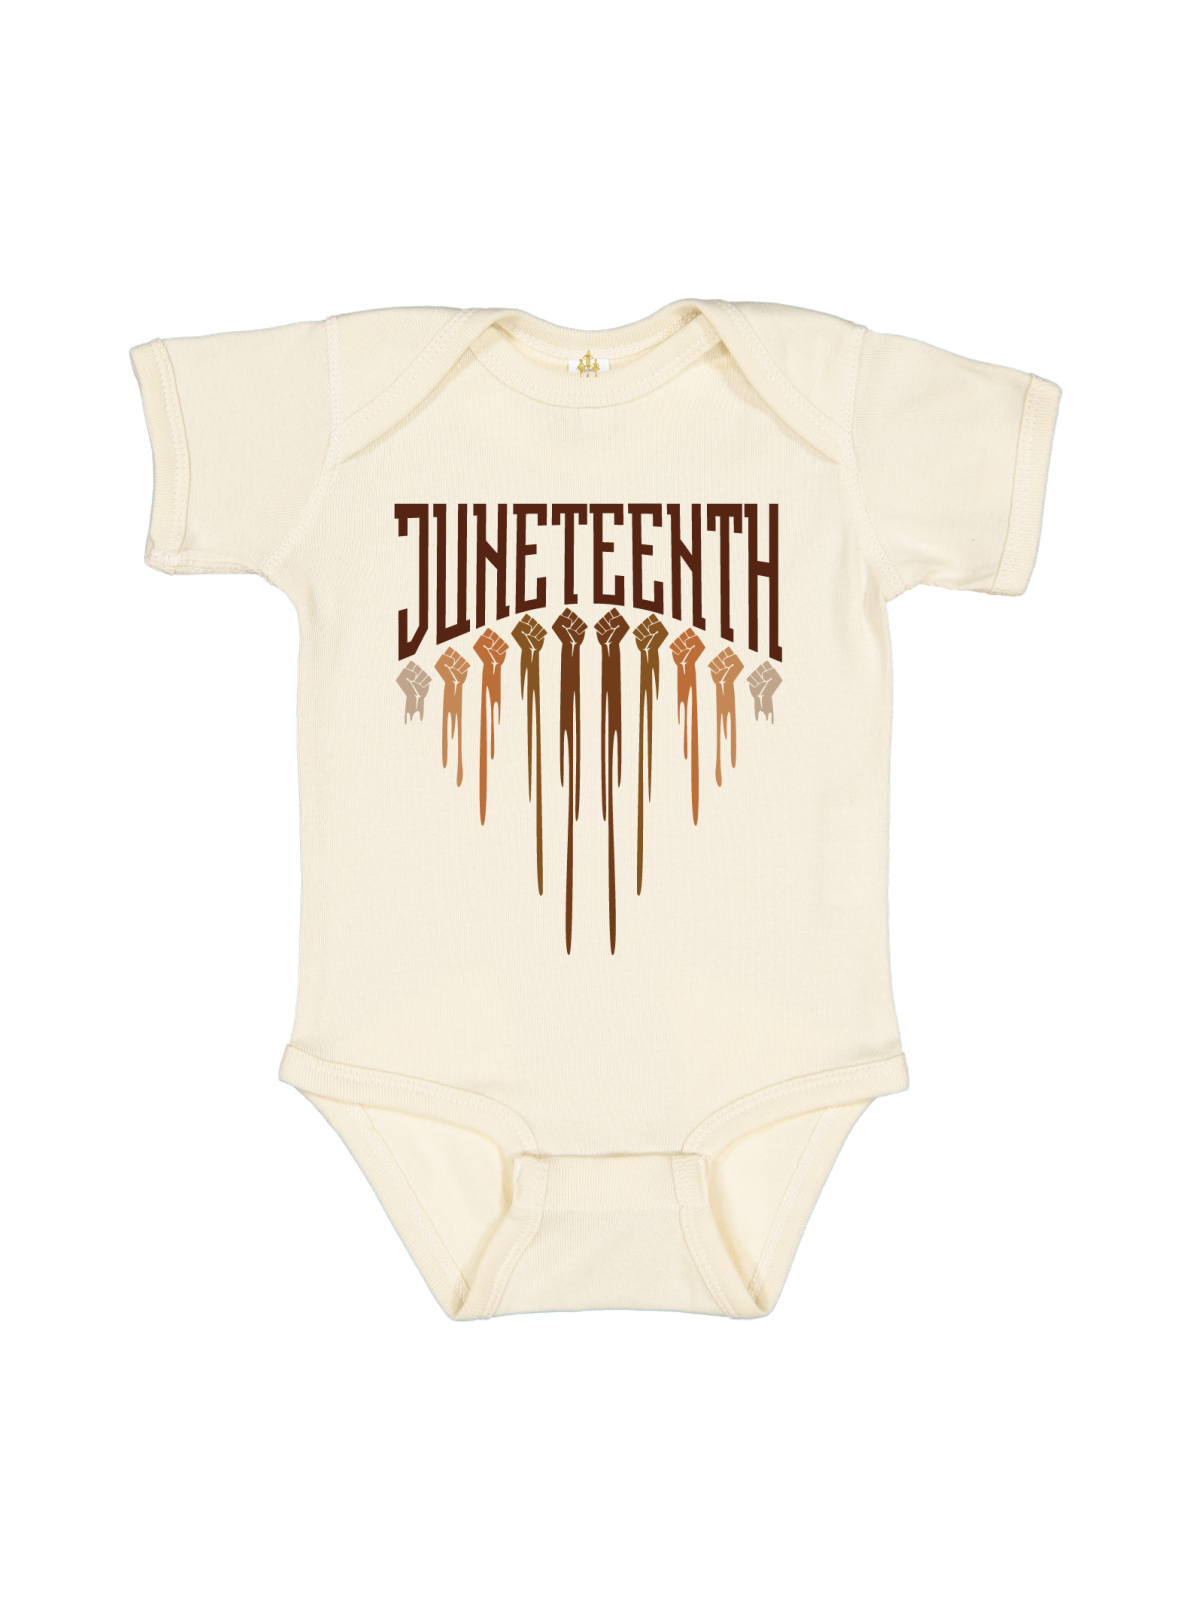 Shades of Fists Juneteenth Baby Bodysuit